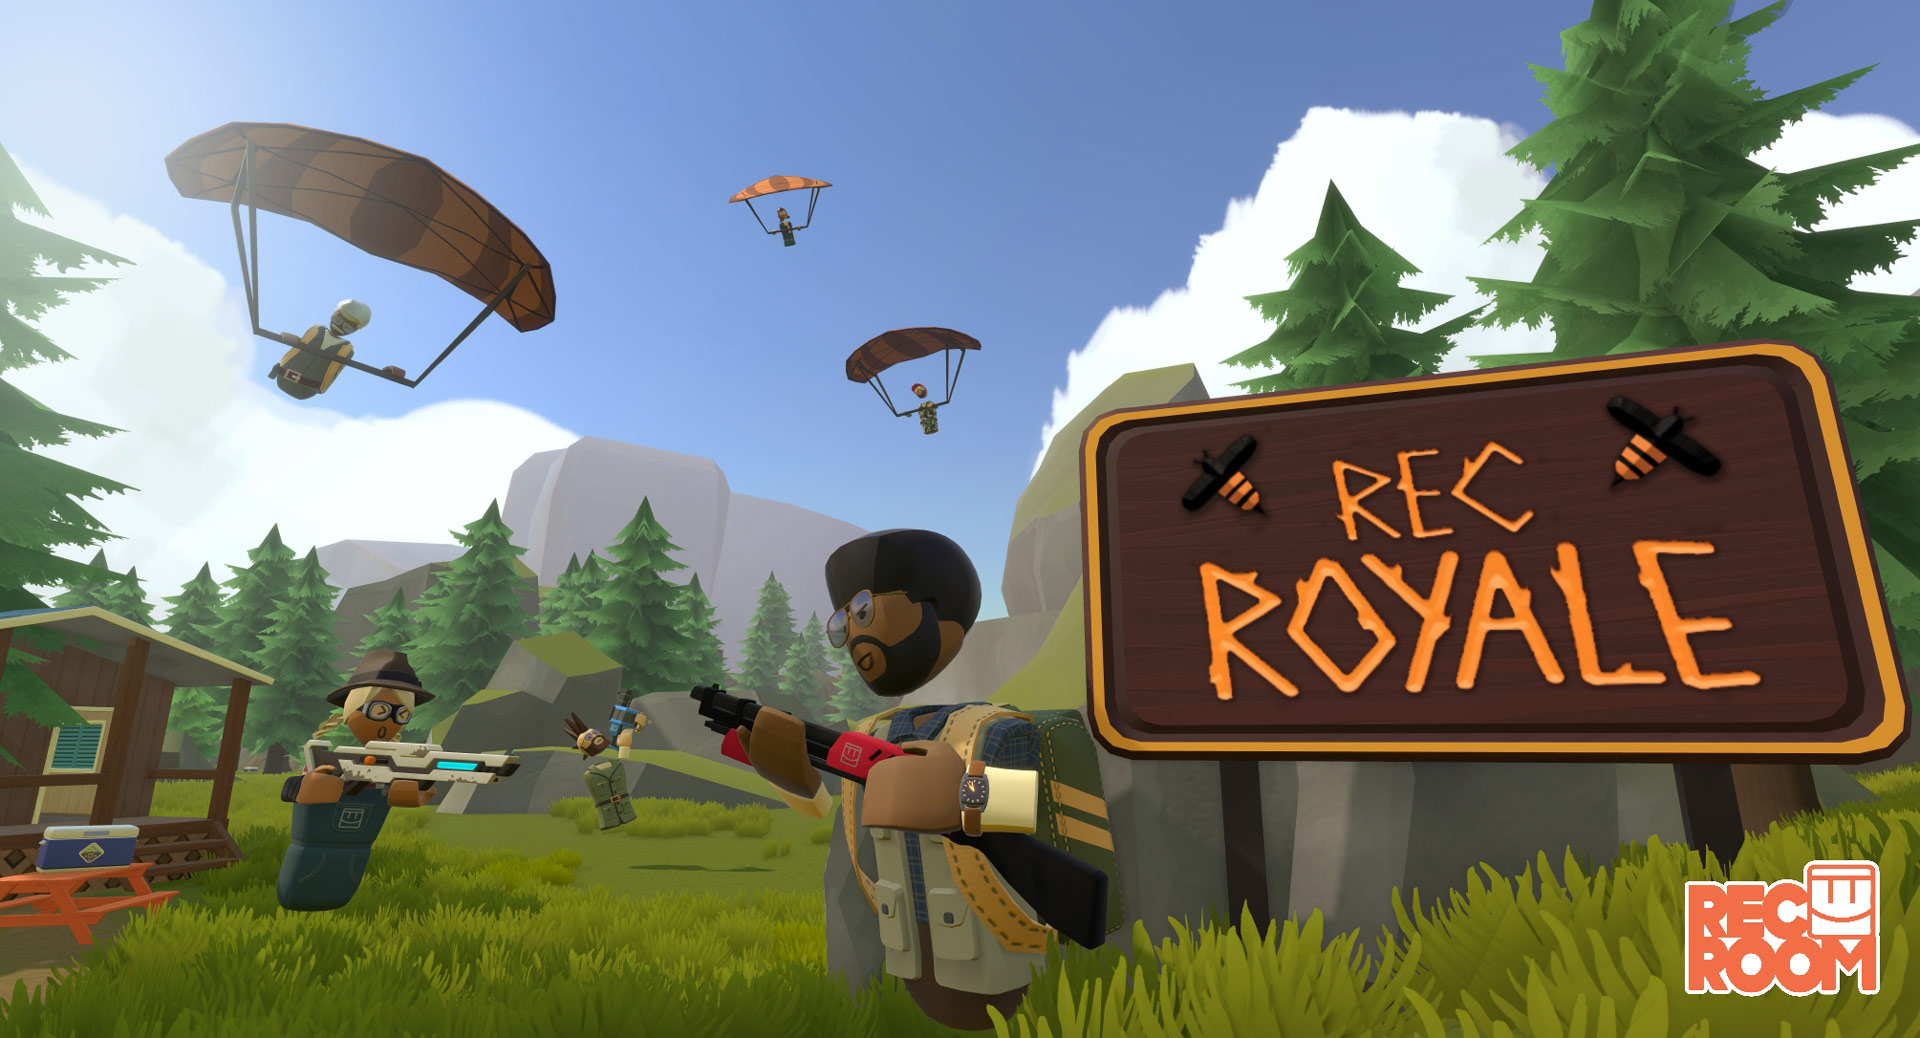 Hands-on: 'Rec Royale' is a Promising Battle Royale Shooter From 'Rec Road to VR